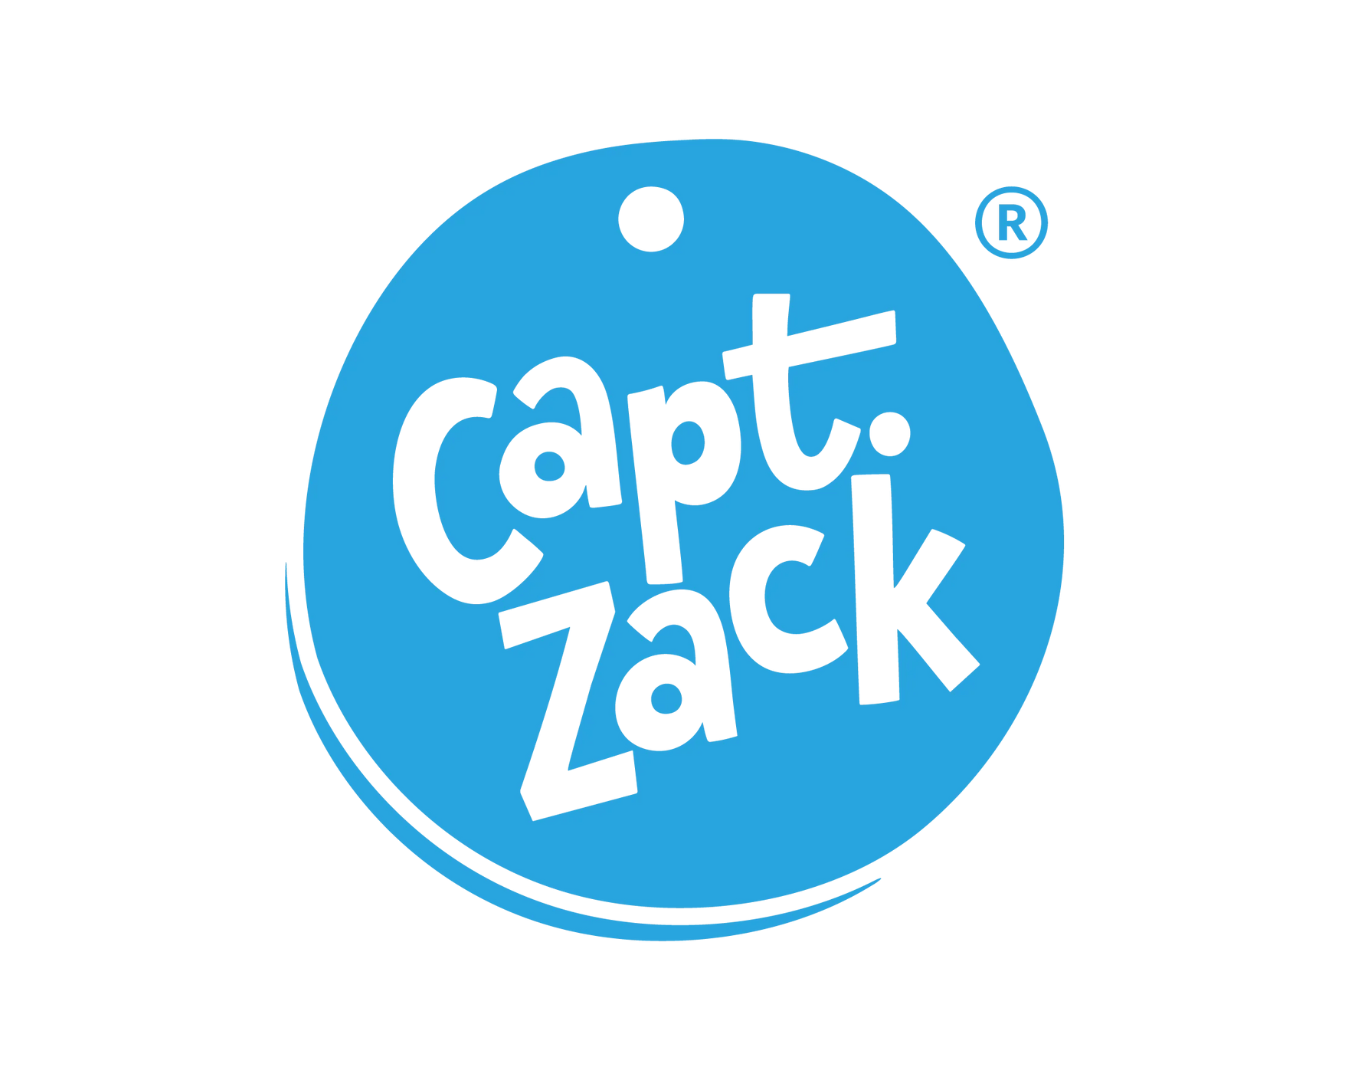 Zack pet food logo featuring the brand name in a blue circular design with white text and registered trademark symbol.